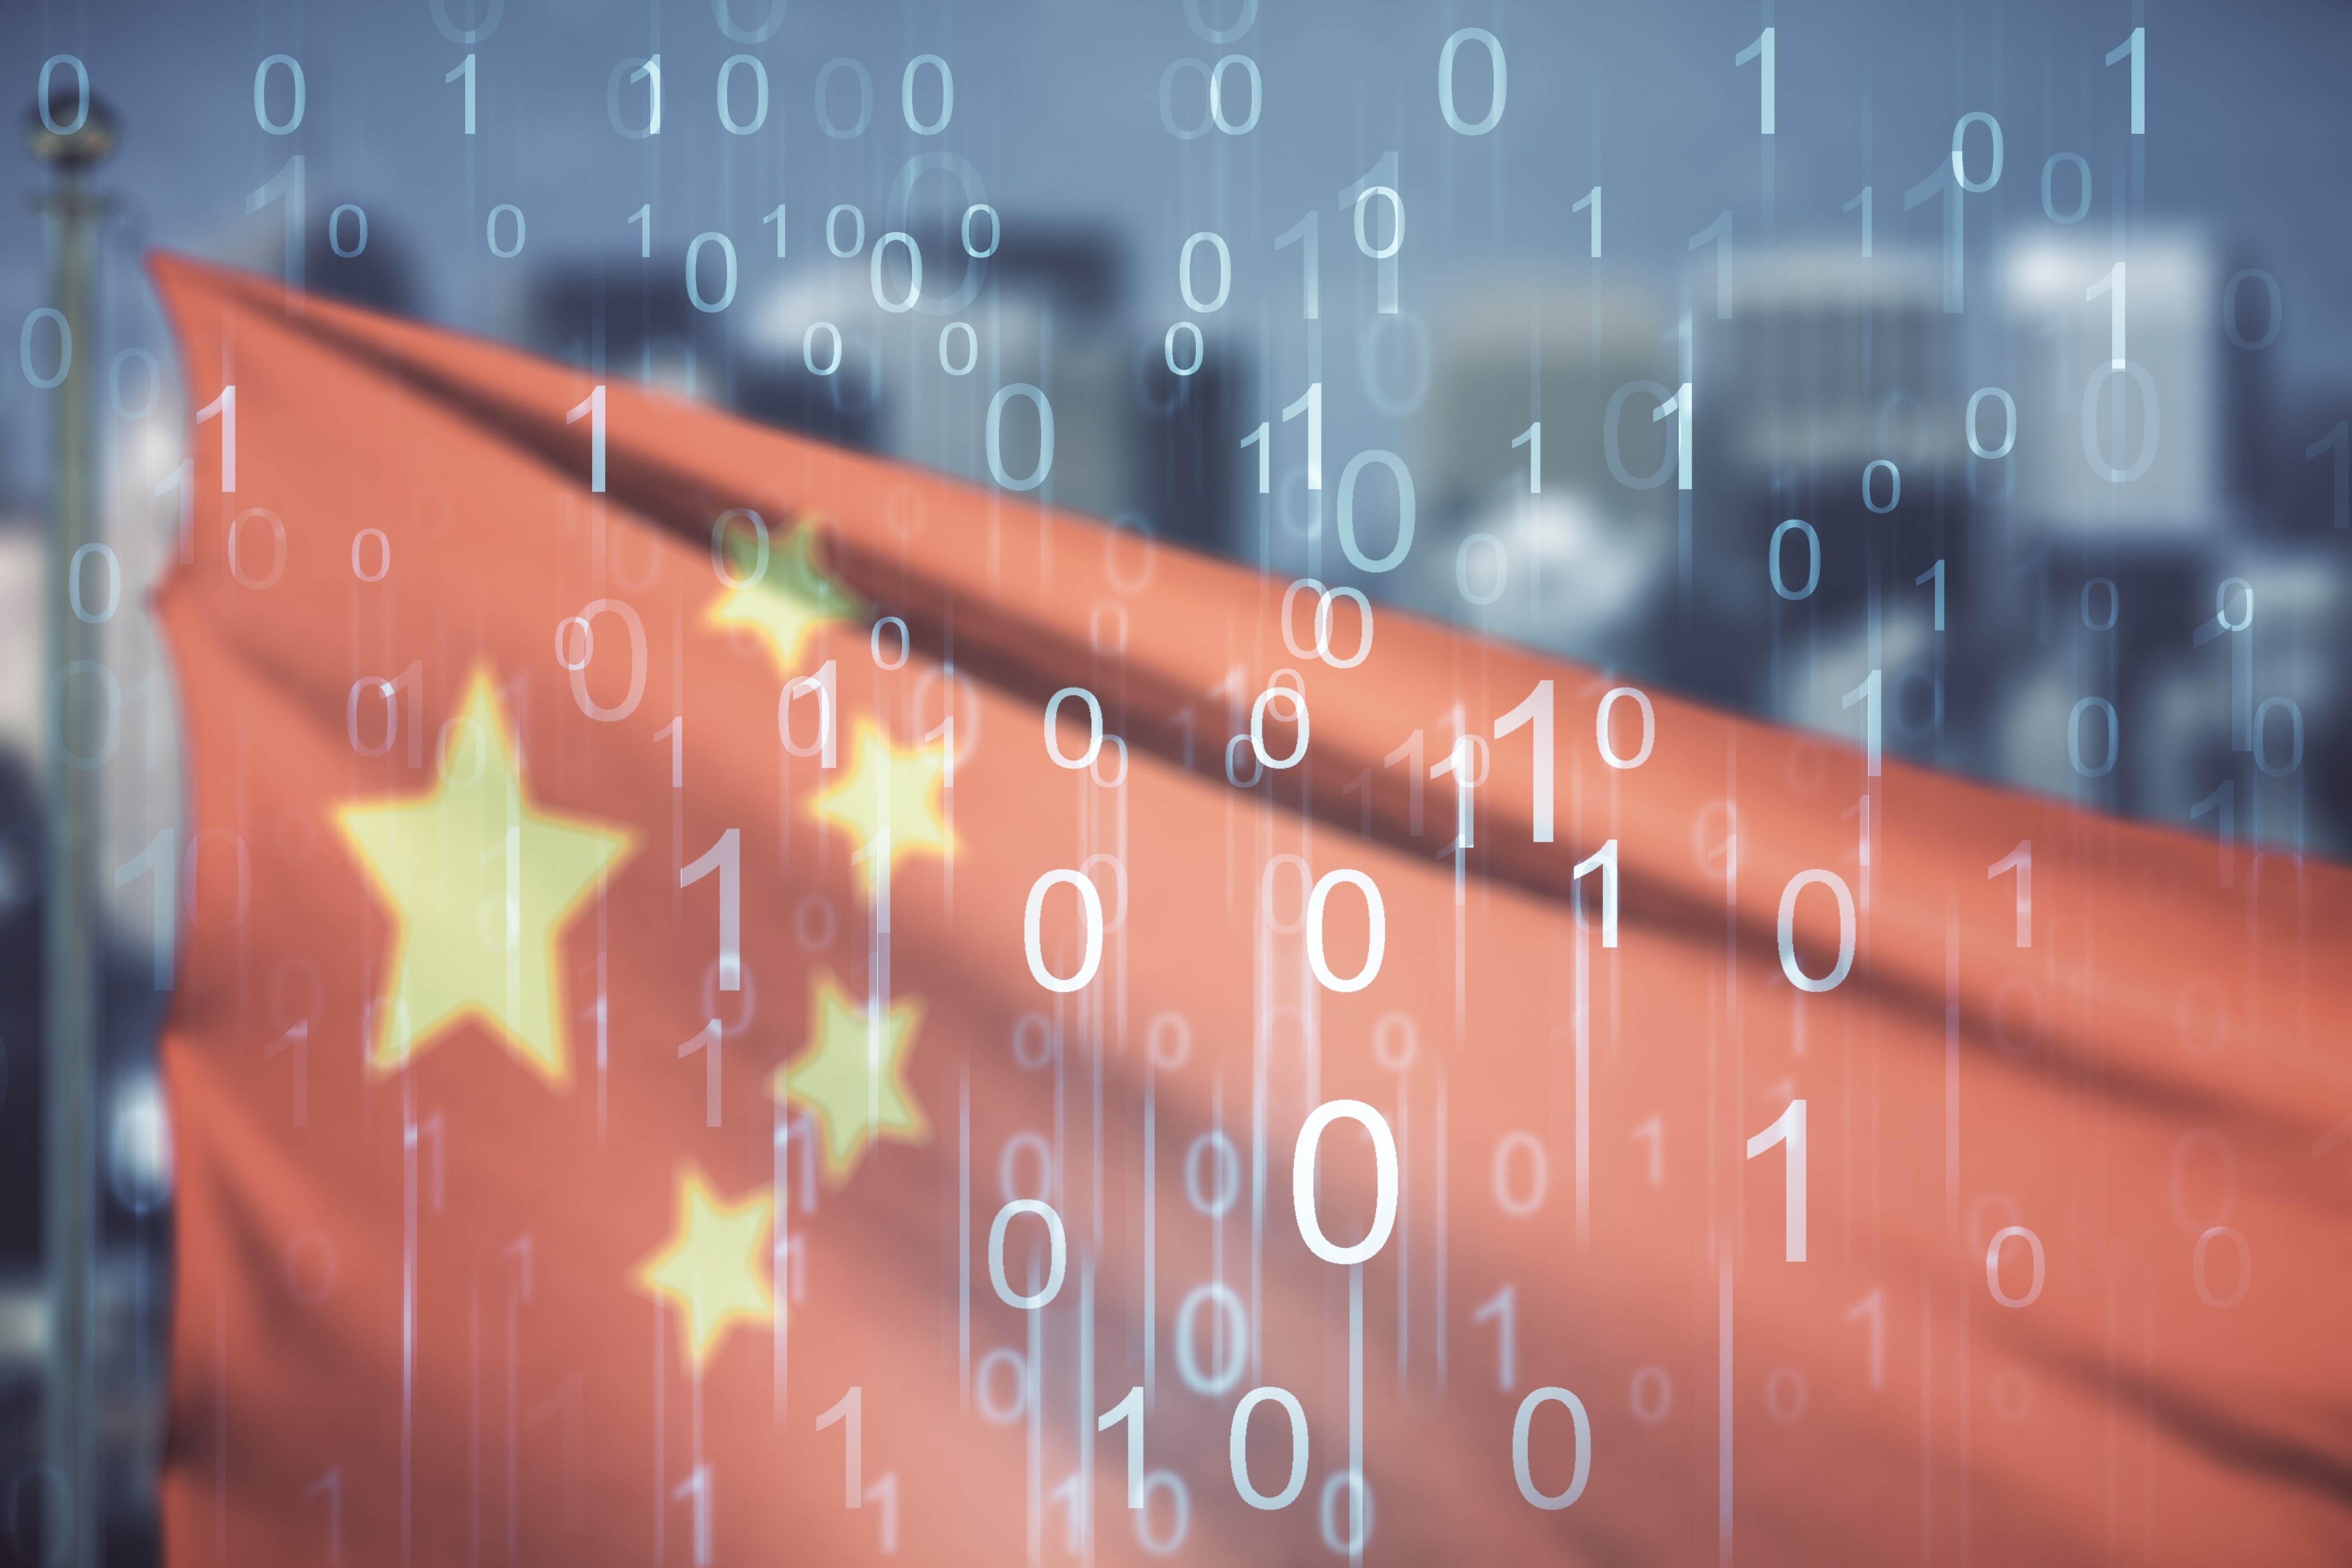 Beijing is pushing digitalisation as part of efforts to drive economic growth and technology development. Photo: Shutterstock